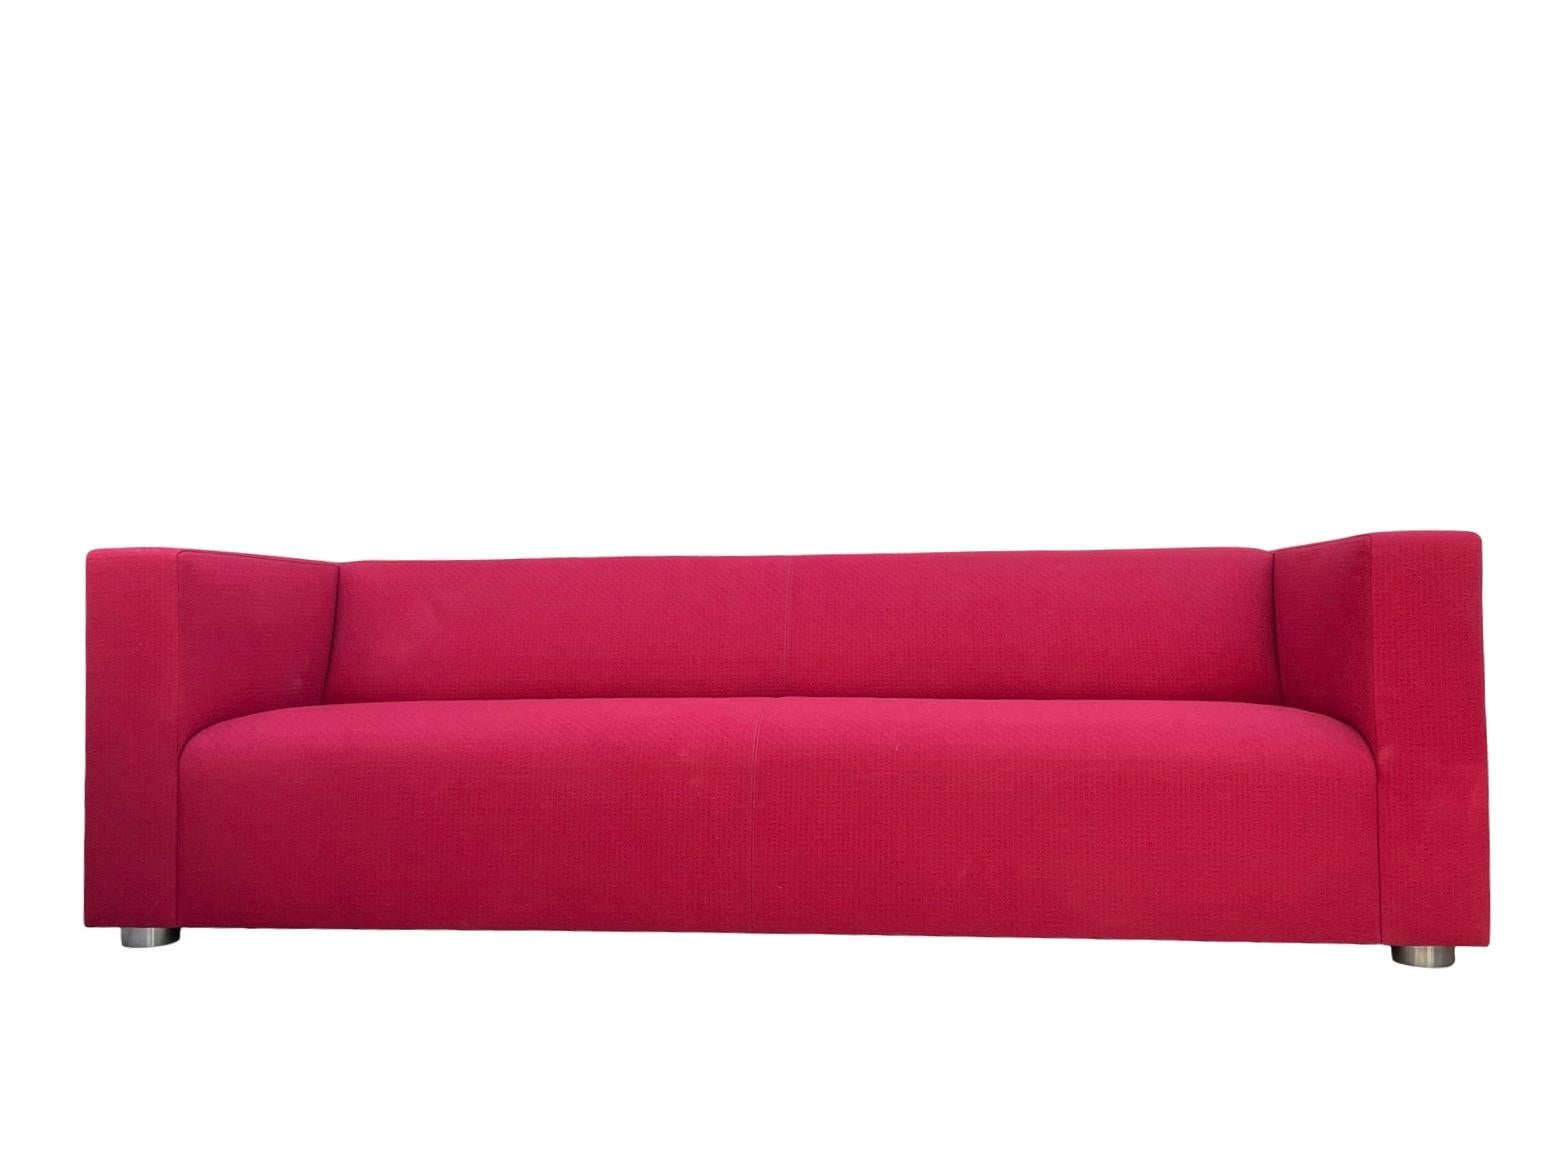 Mid-Century Modern Edward Barber & Jay Osgerby Red Sofa For Knoll For Sale